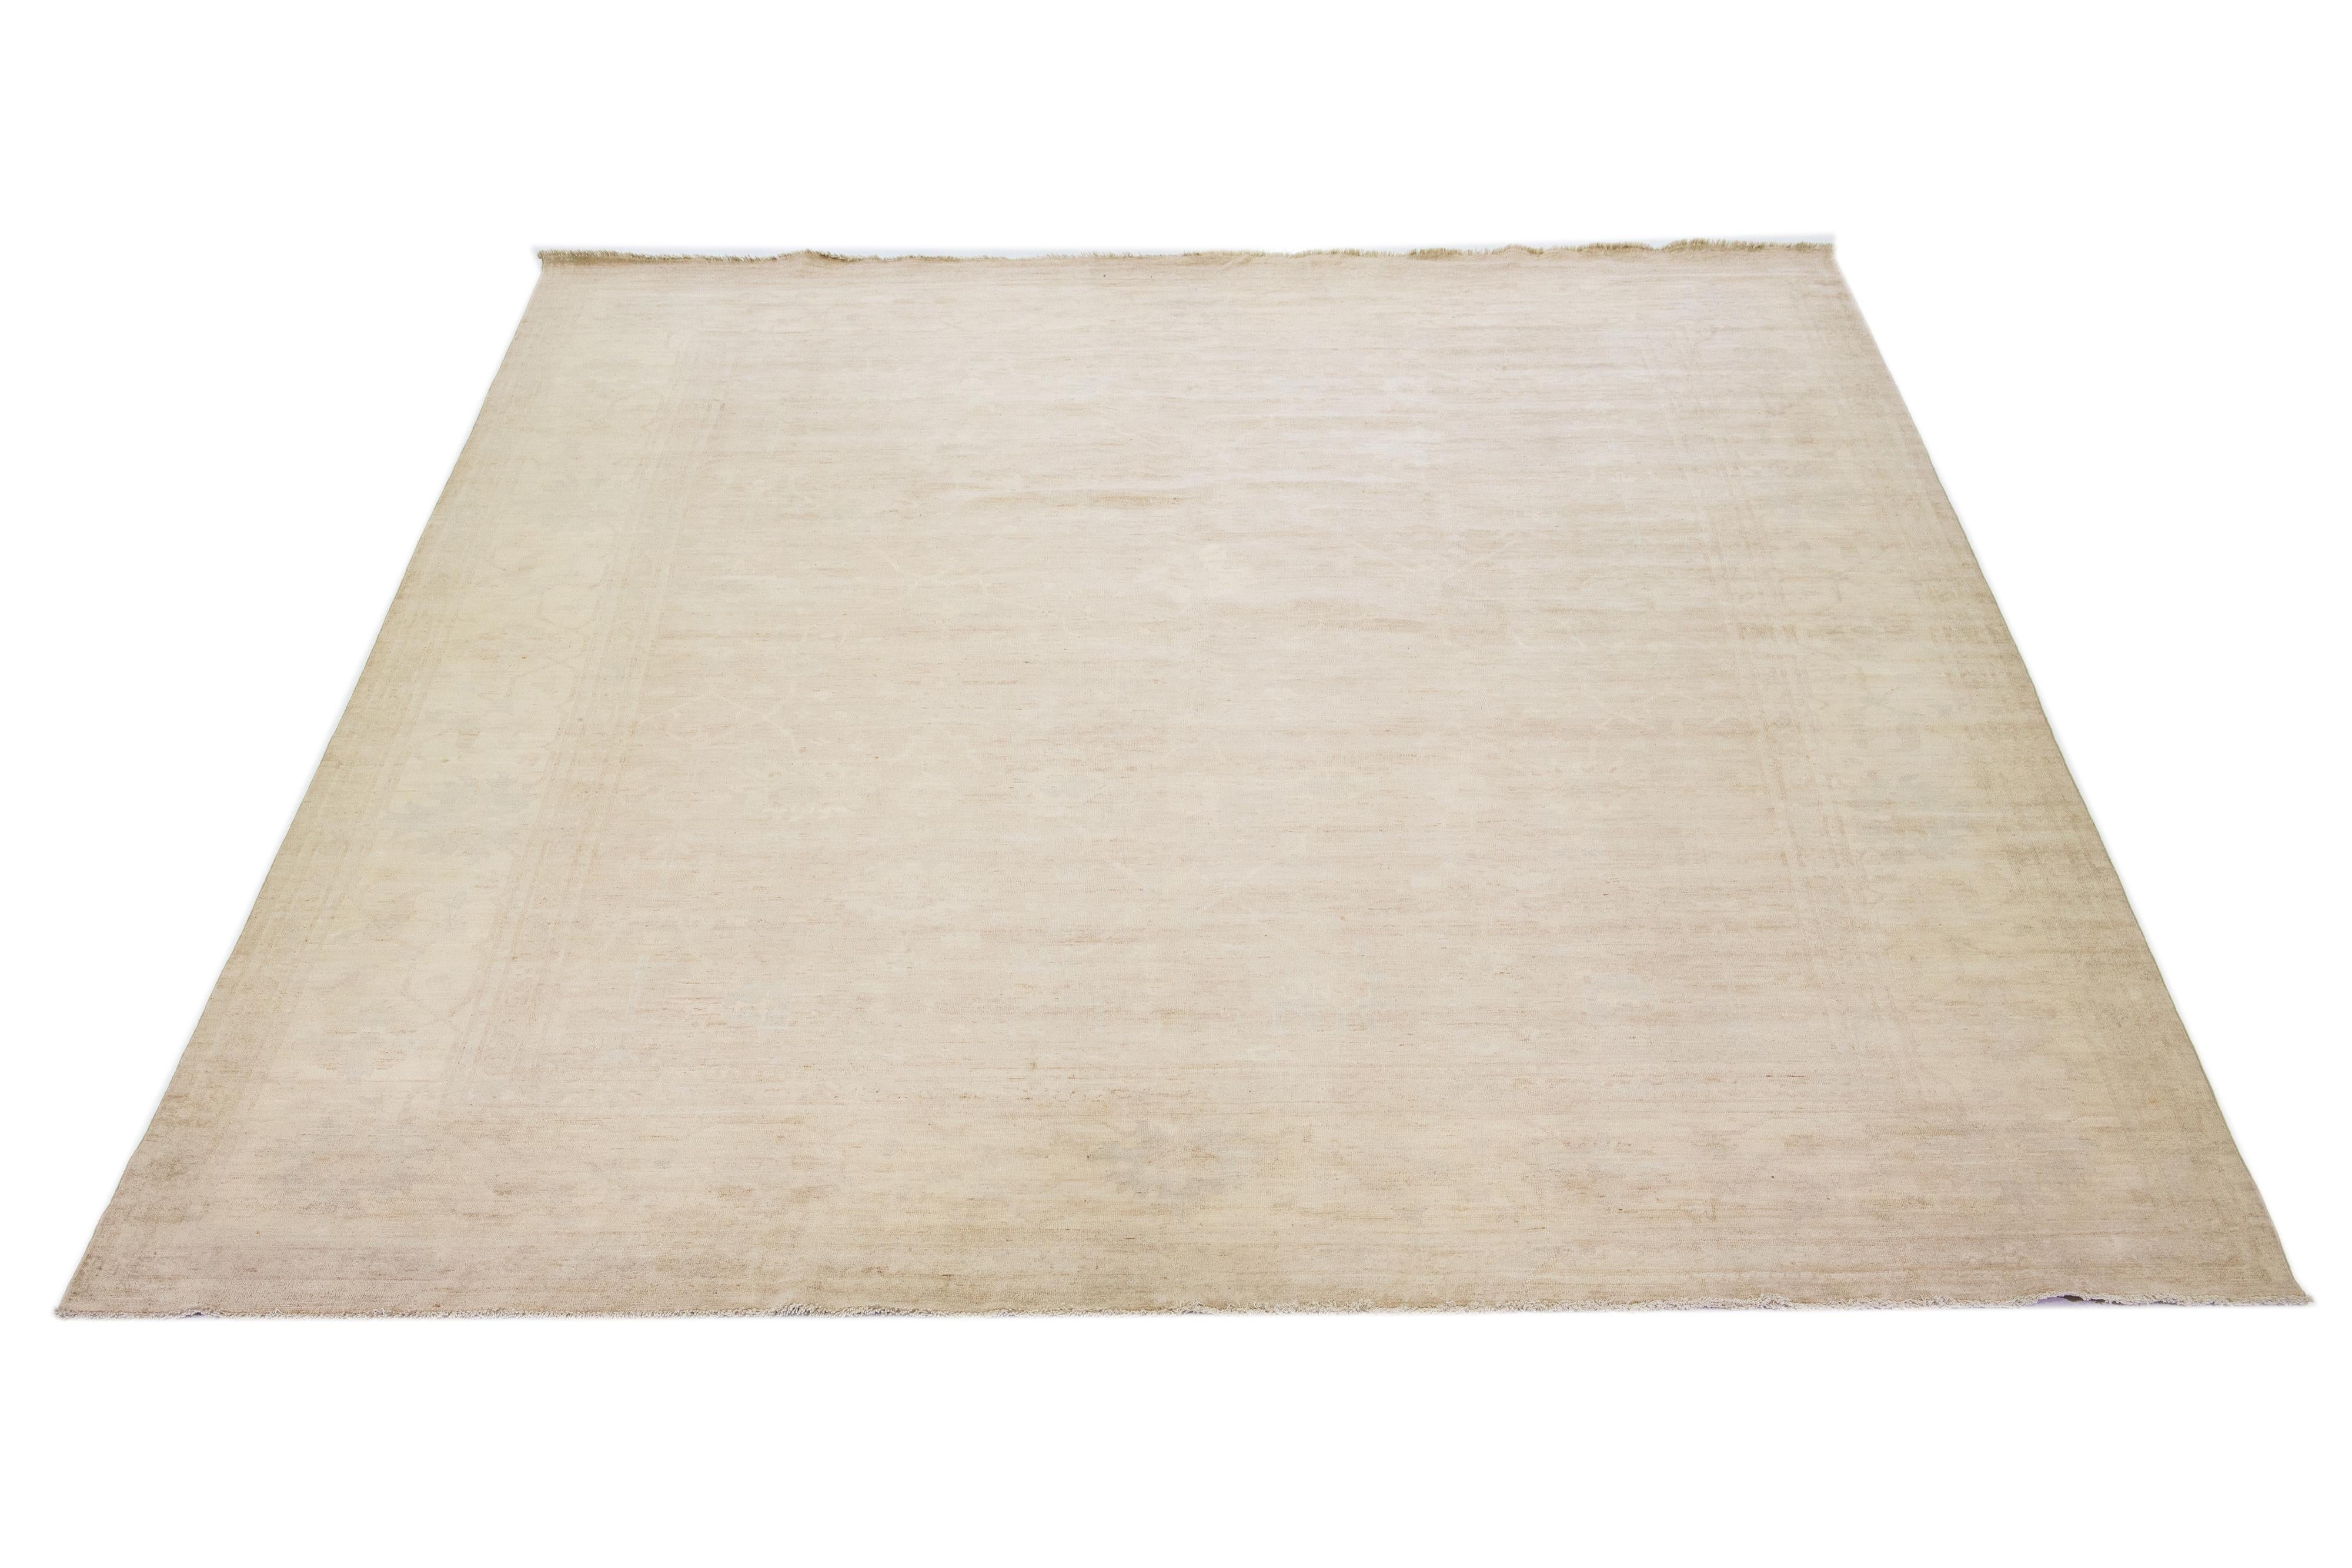 Beautiful modern Oushak hand-knotted wool rug with a beige color field. This Piece has gray accent colors in a gorgeous all-over floral design.

This rug measures: 12' x 14'4